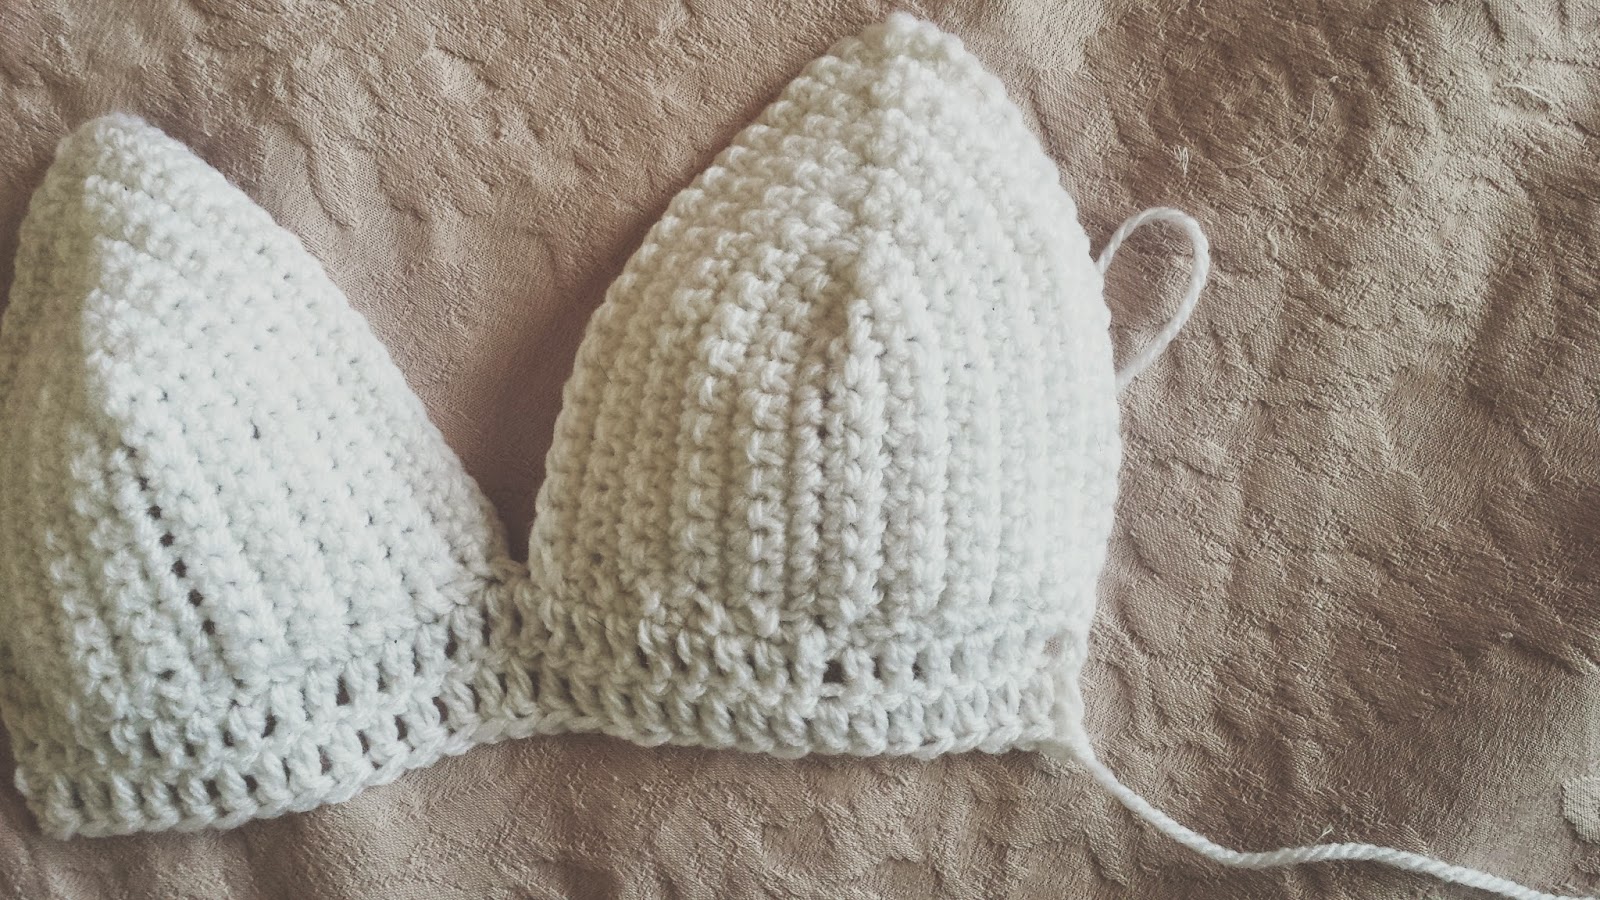 From A Thread: How To Crochet A Simple Bralette / Crop Top Pattern